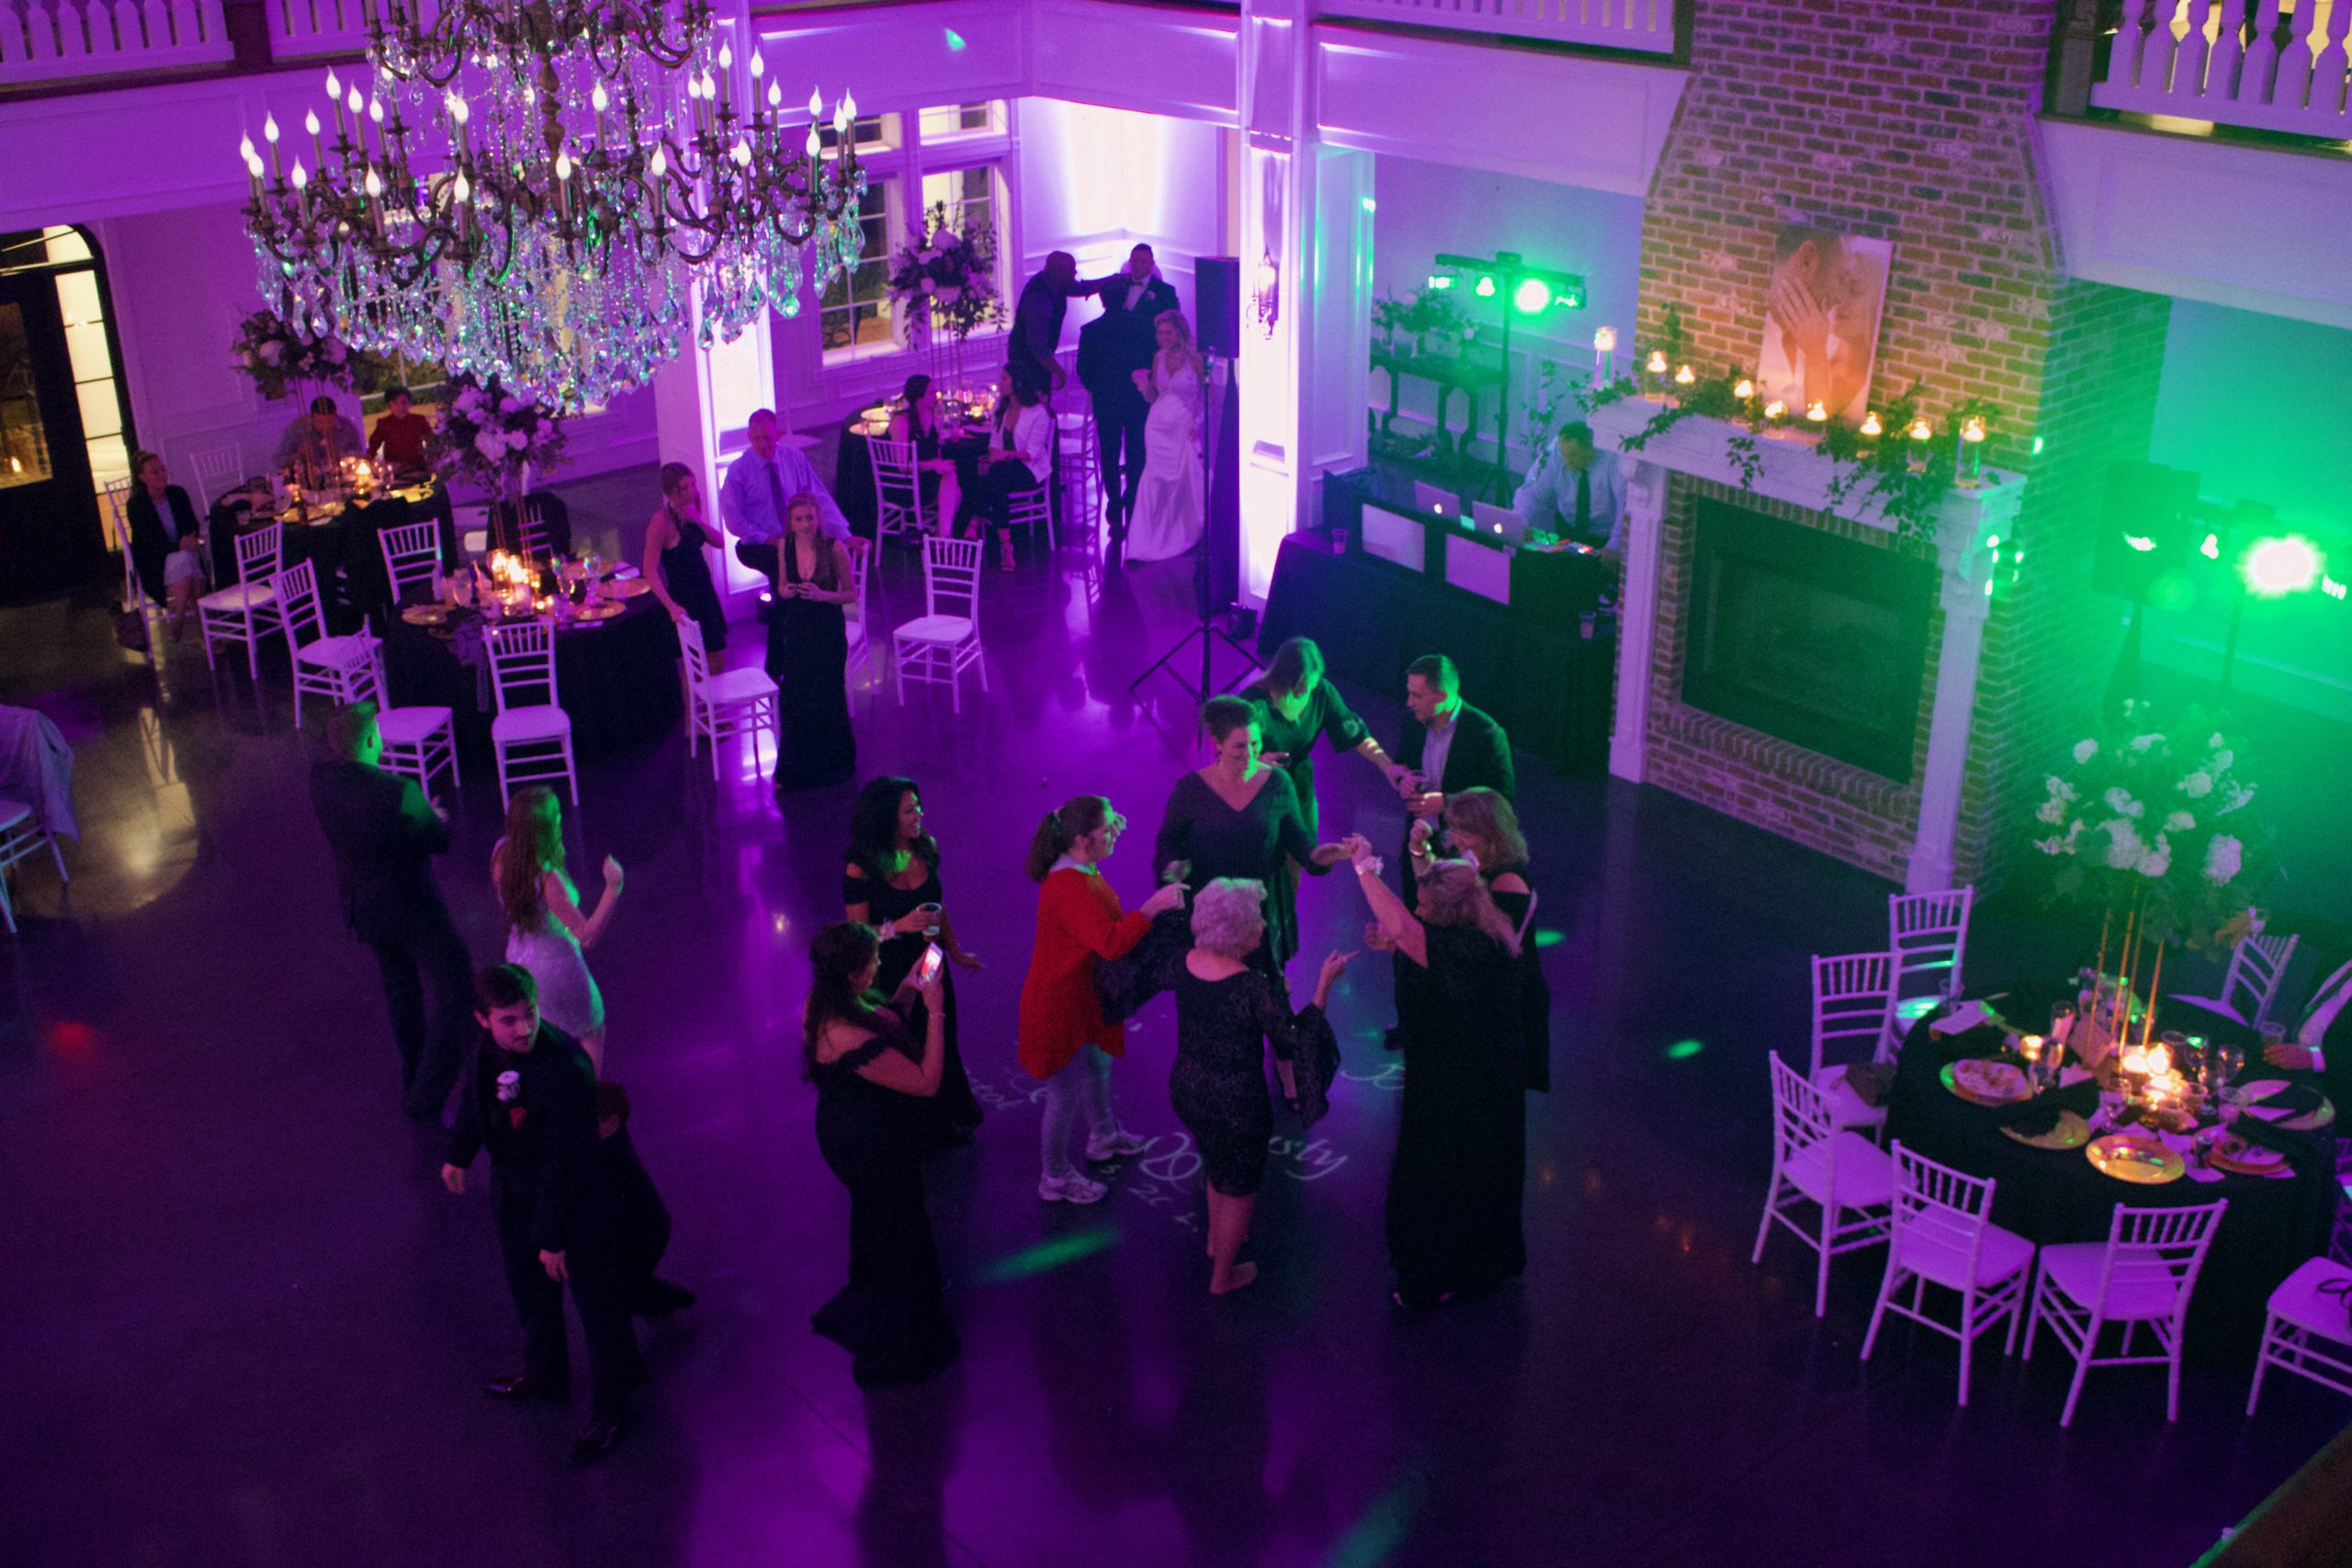 How do you enhance the mood and ambience of your next event?